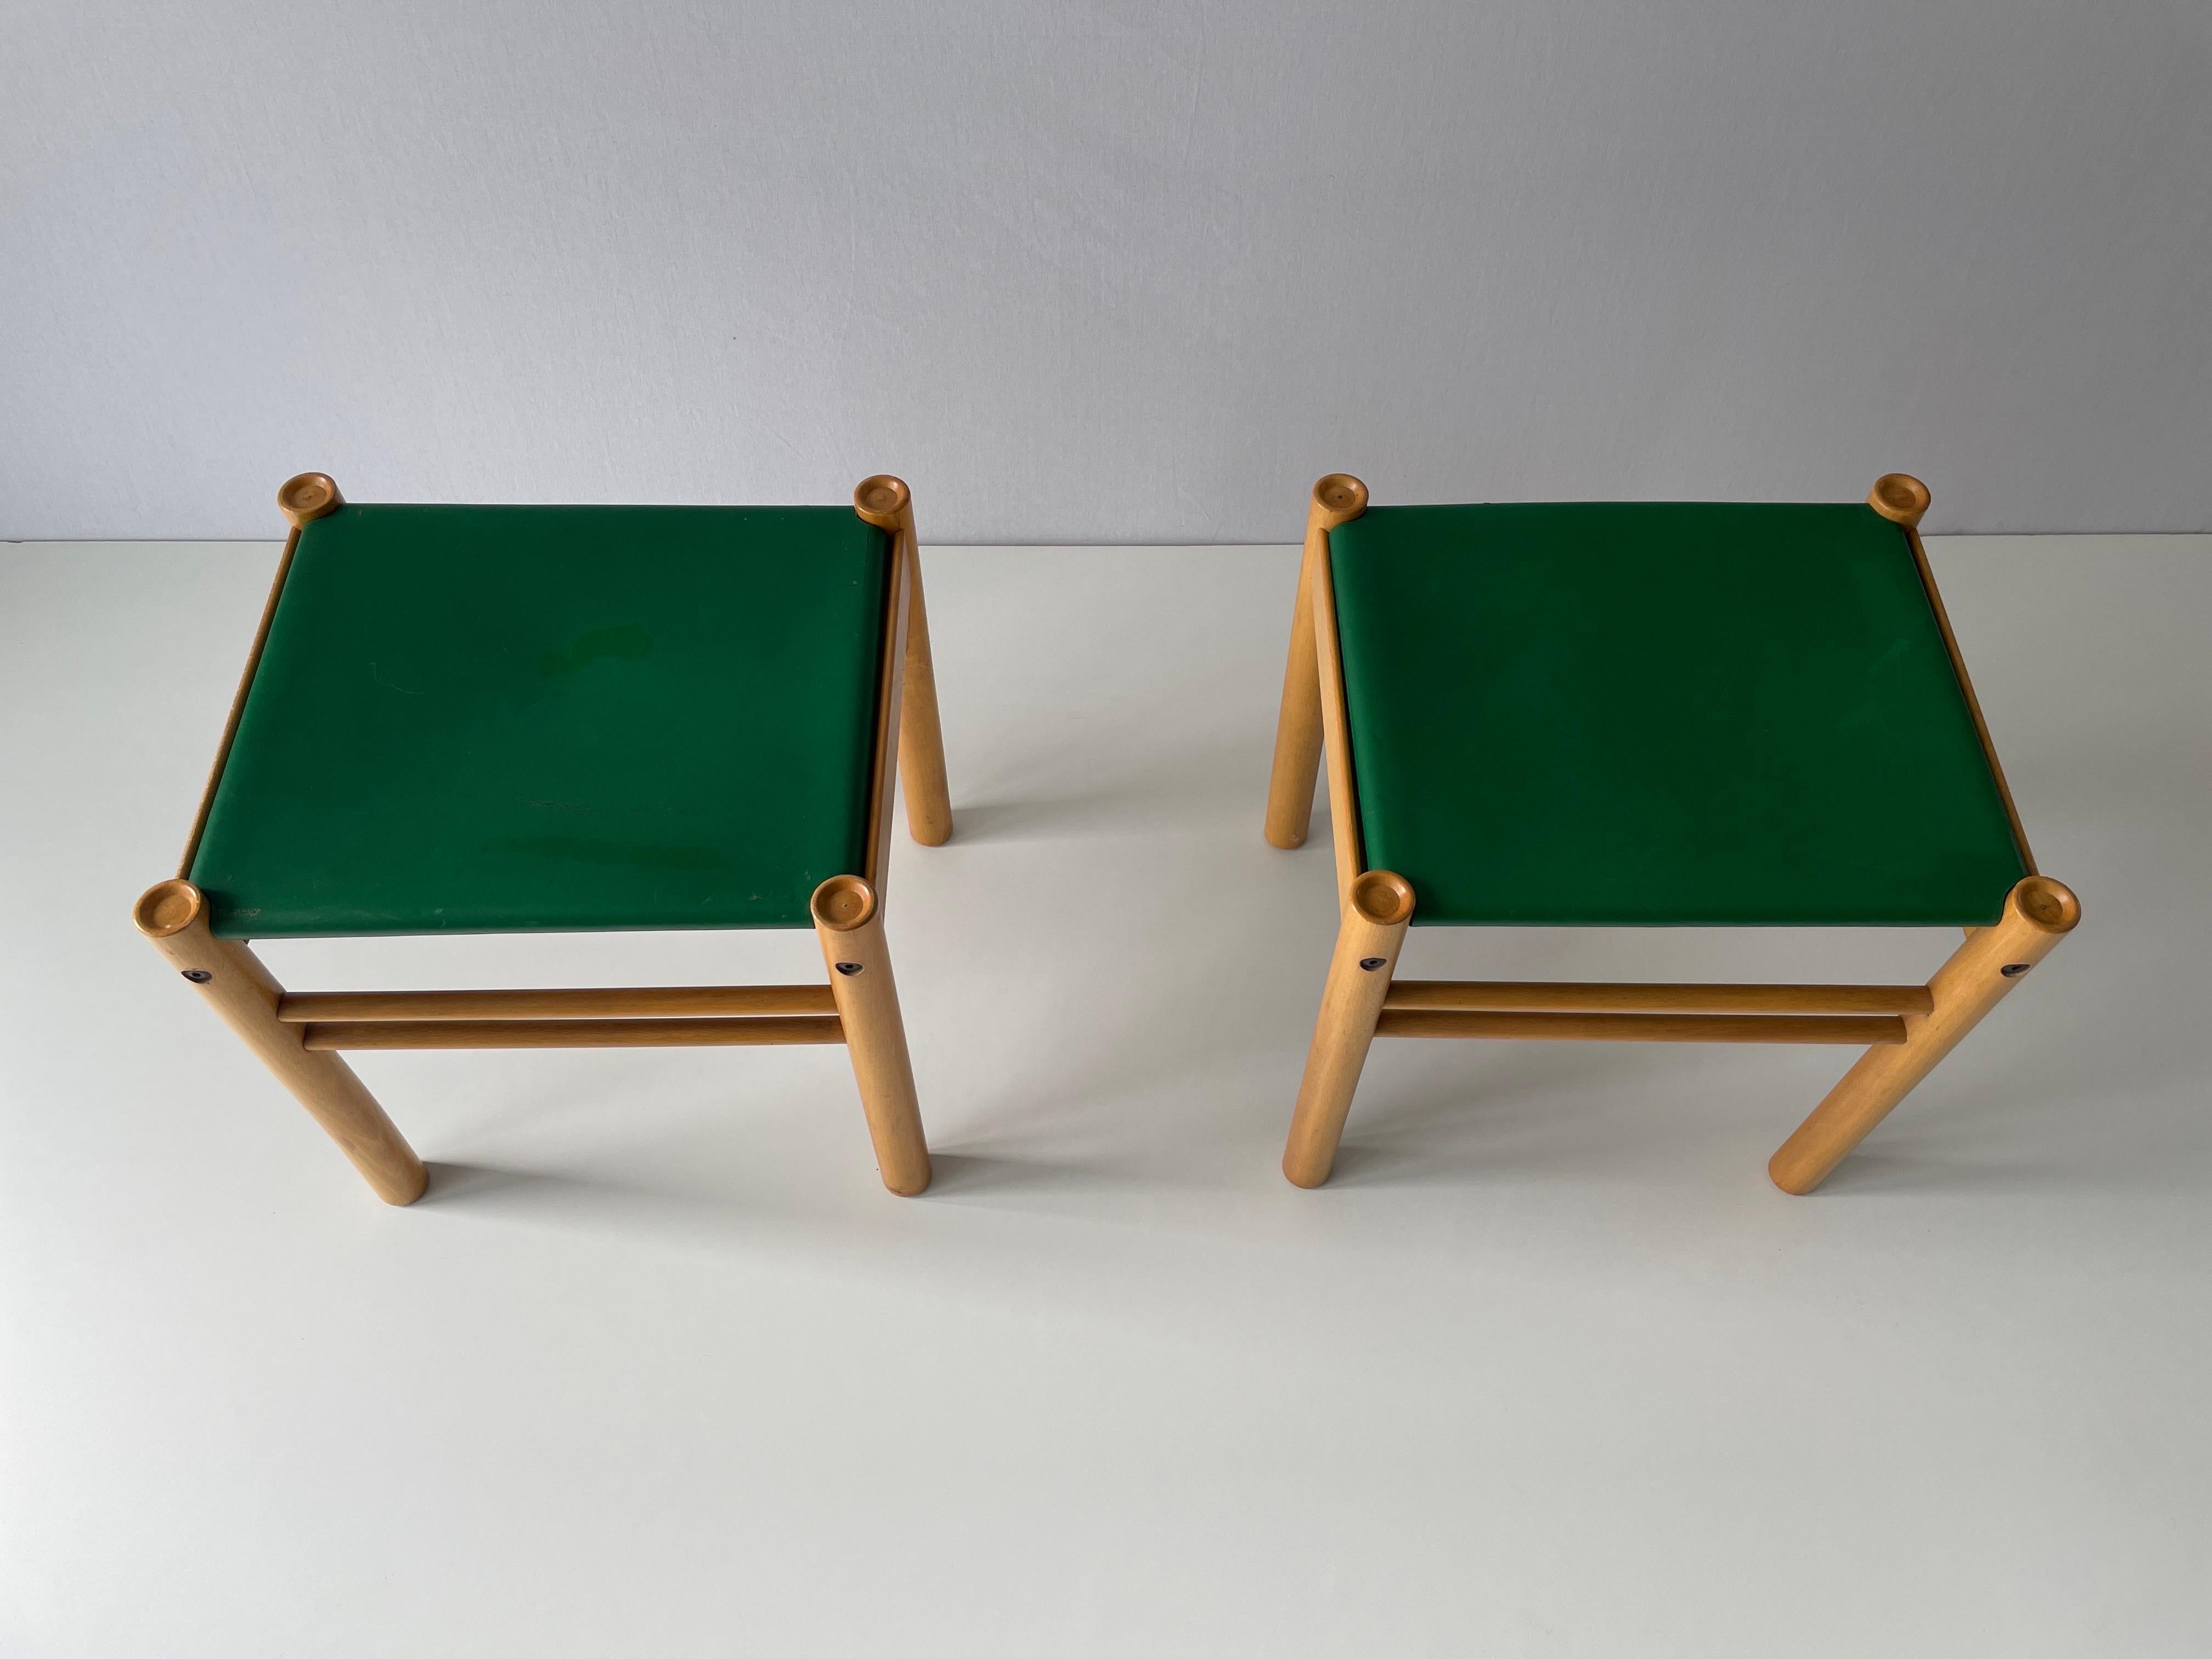 Late 20th Century Green Leather and Birch Wood Pair of Stools by IBISCO, 1970s, Italy For Sale